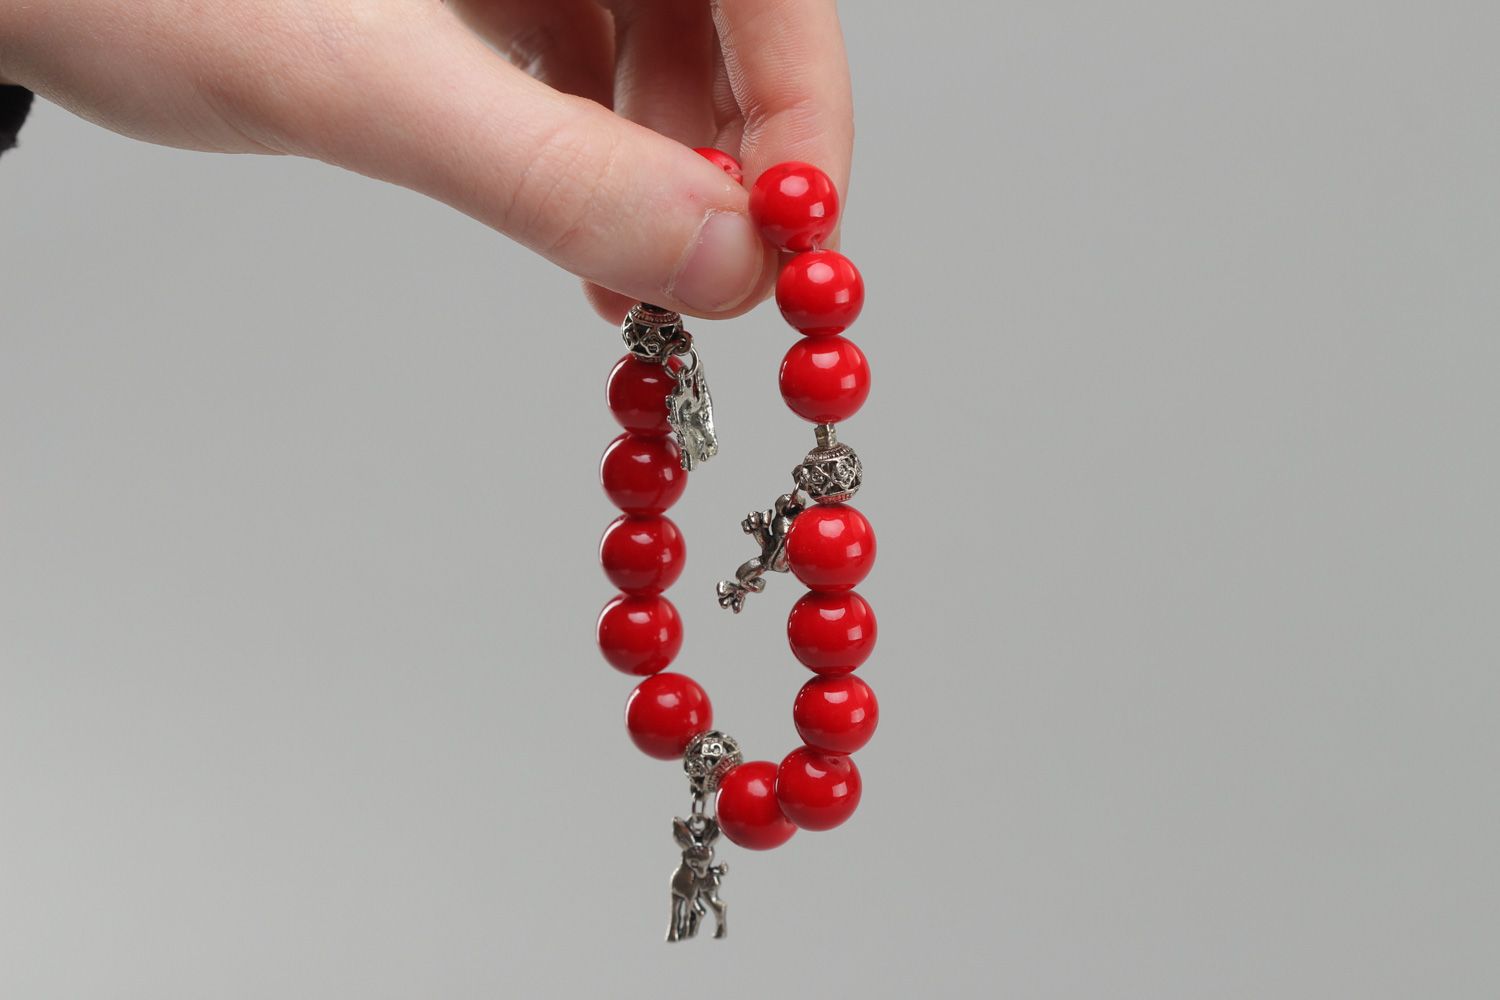 Handmade wrist bracelet with charms and beads of artificial coral for women photo 5